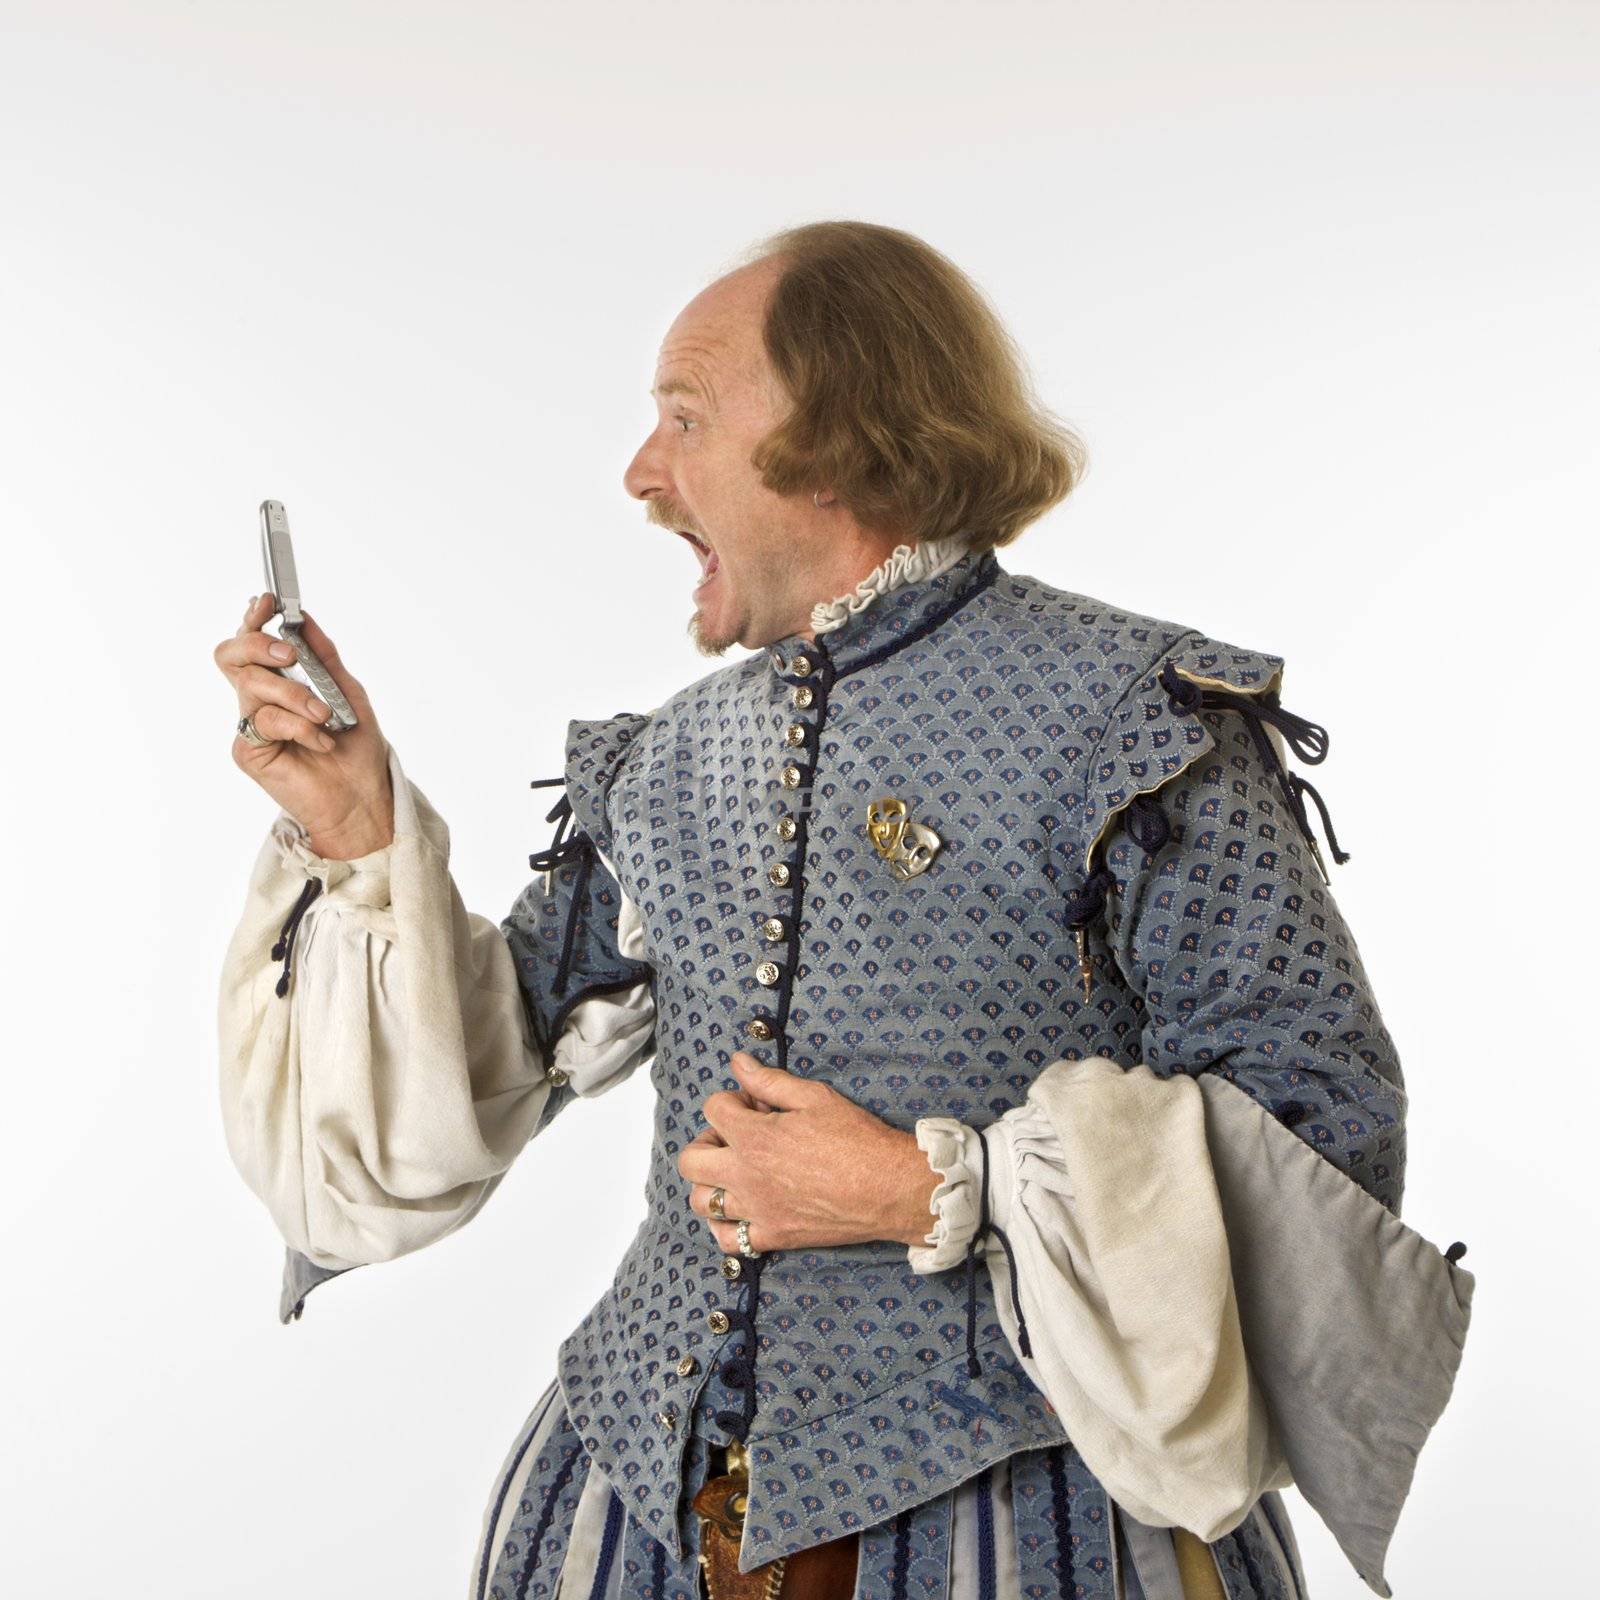 Shakespeare screaming at cell phone. by iofoto